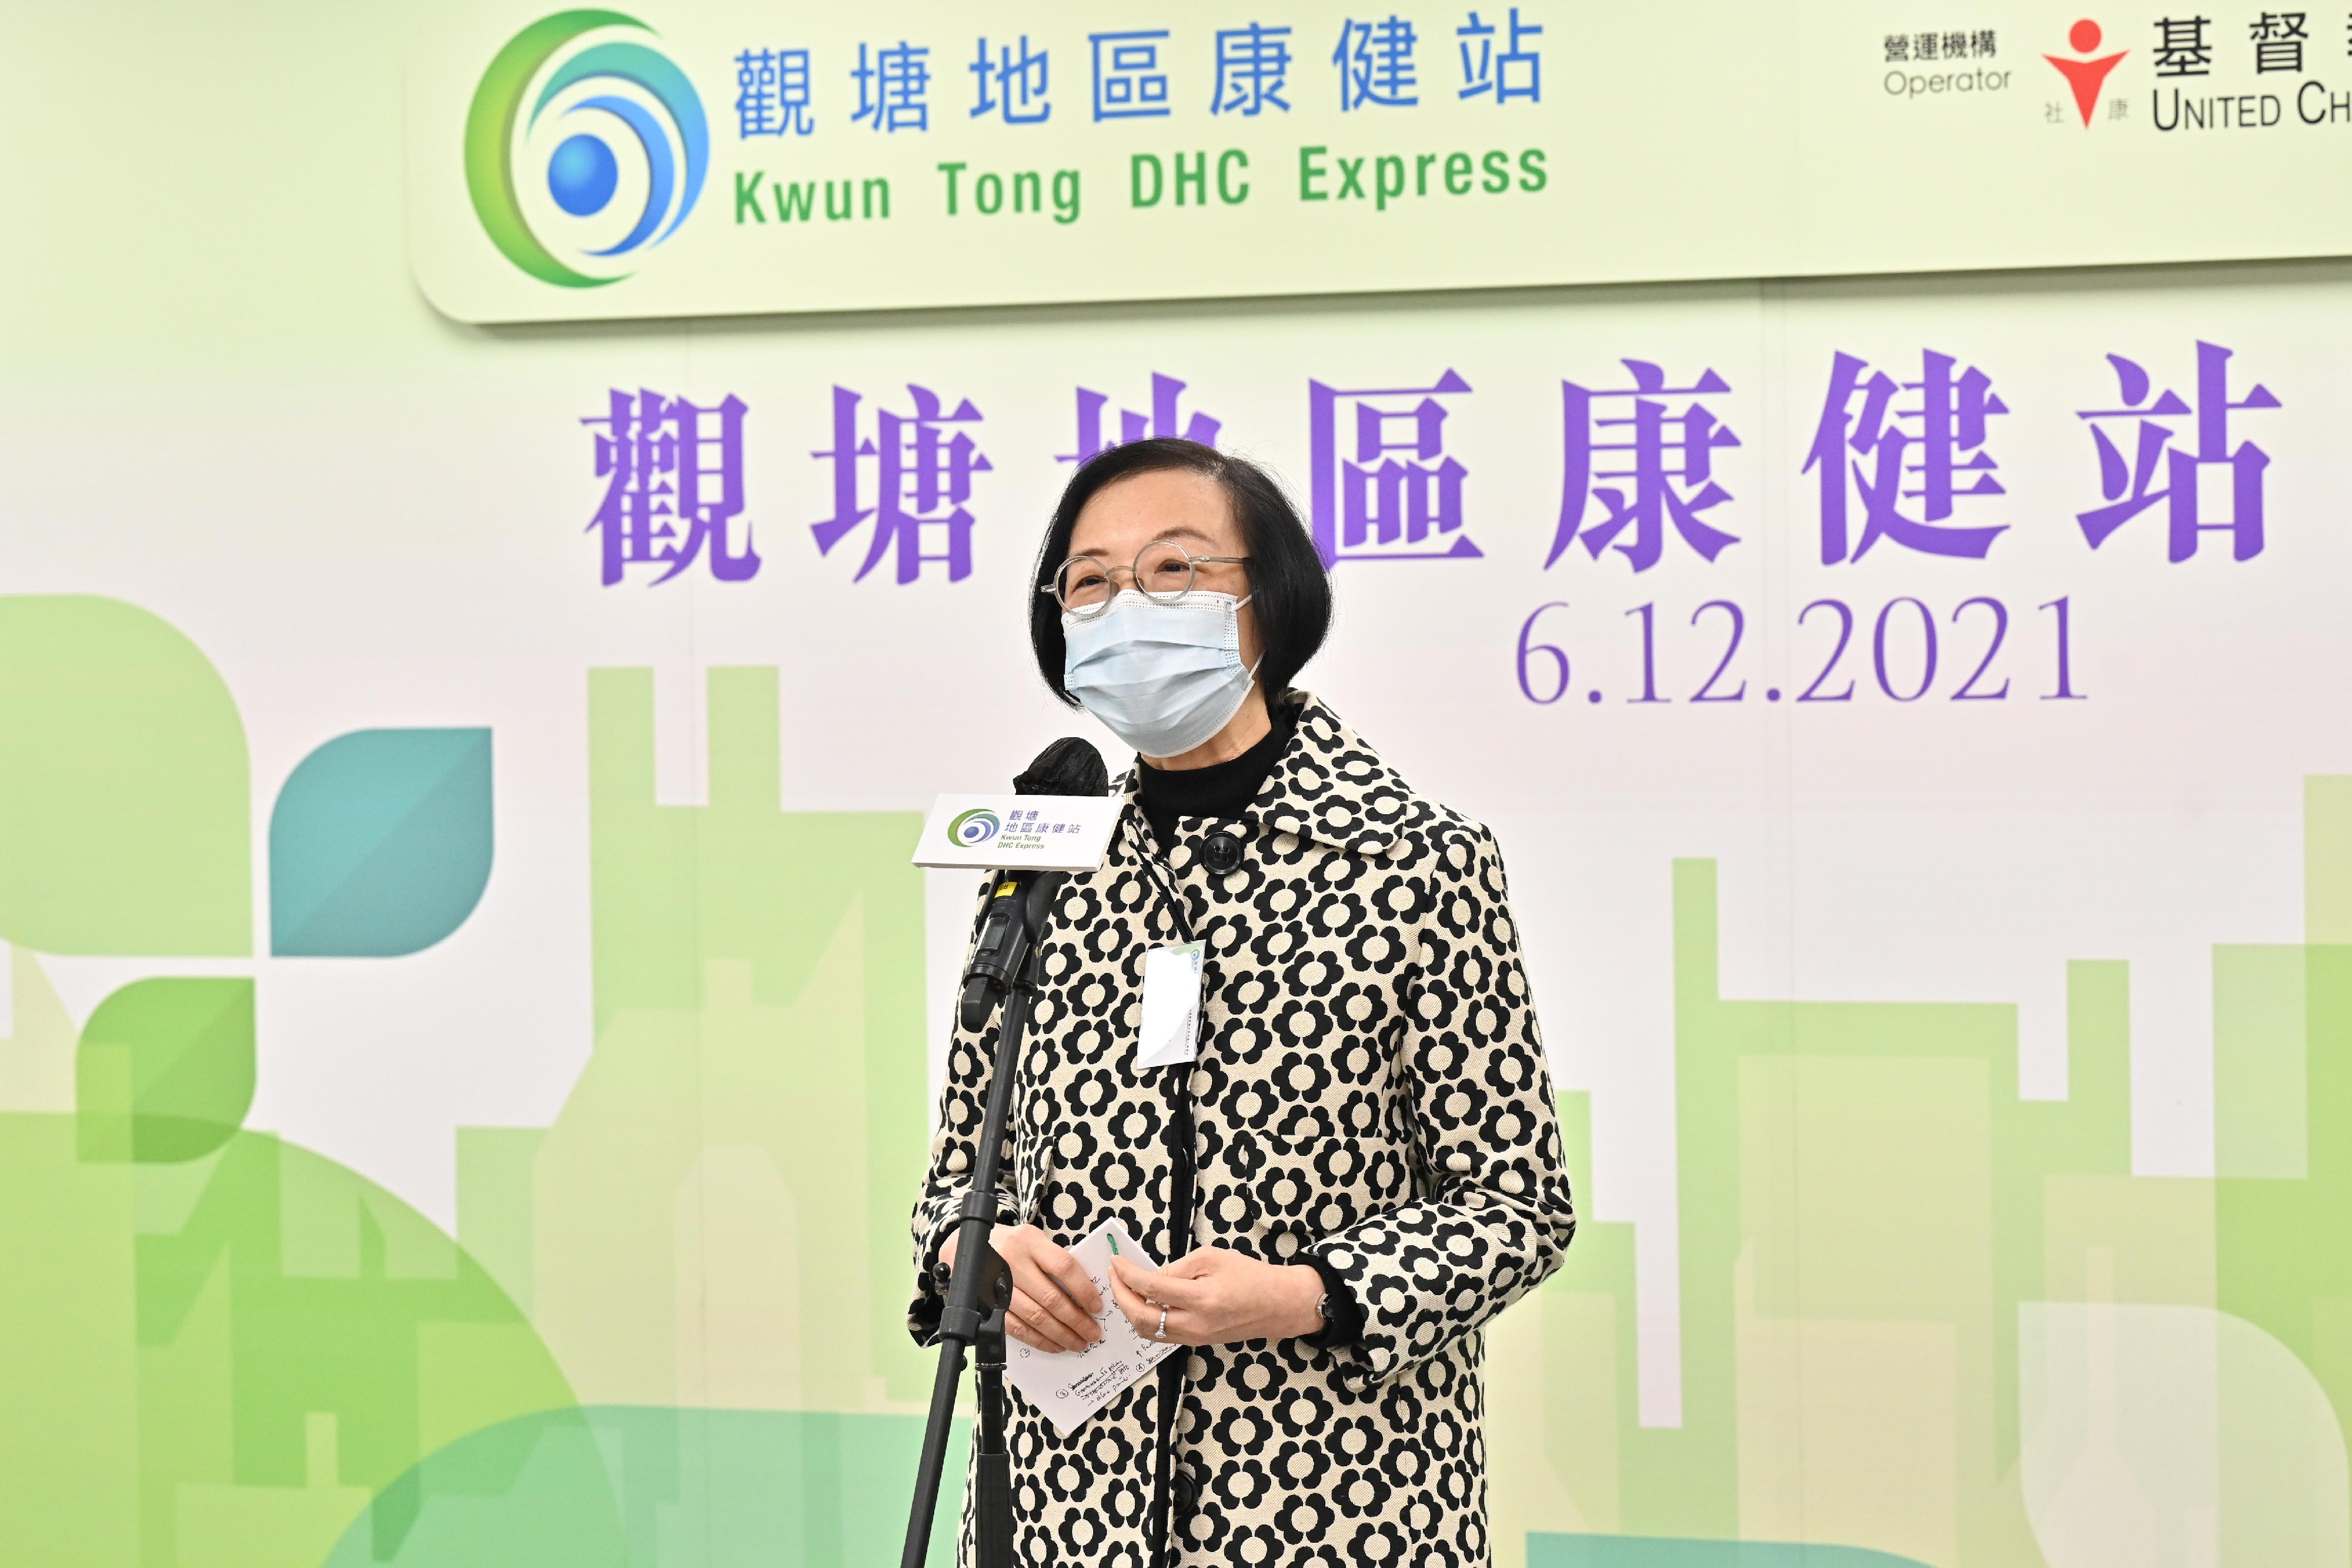 The Secretary for Food and Health, Professor Sophia Chan, delivers a speech at the opening ceremony of the Kwun Tong District Health Centre Express today (December 6).